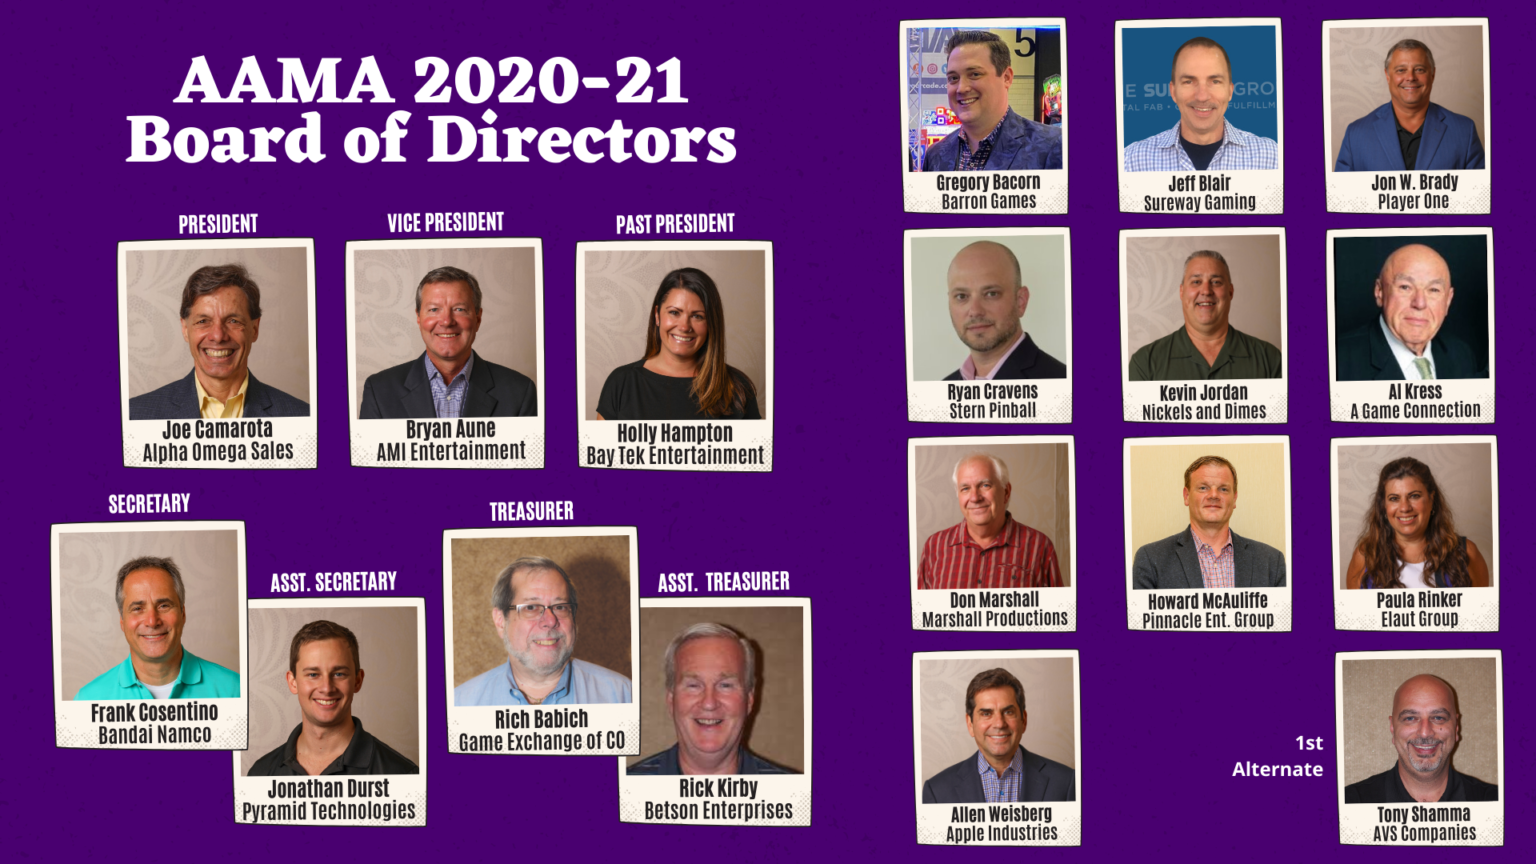 AAMA Elects New Board Members at Annual Meeting